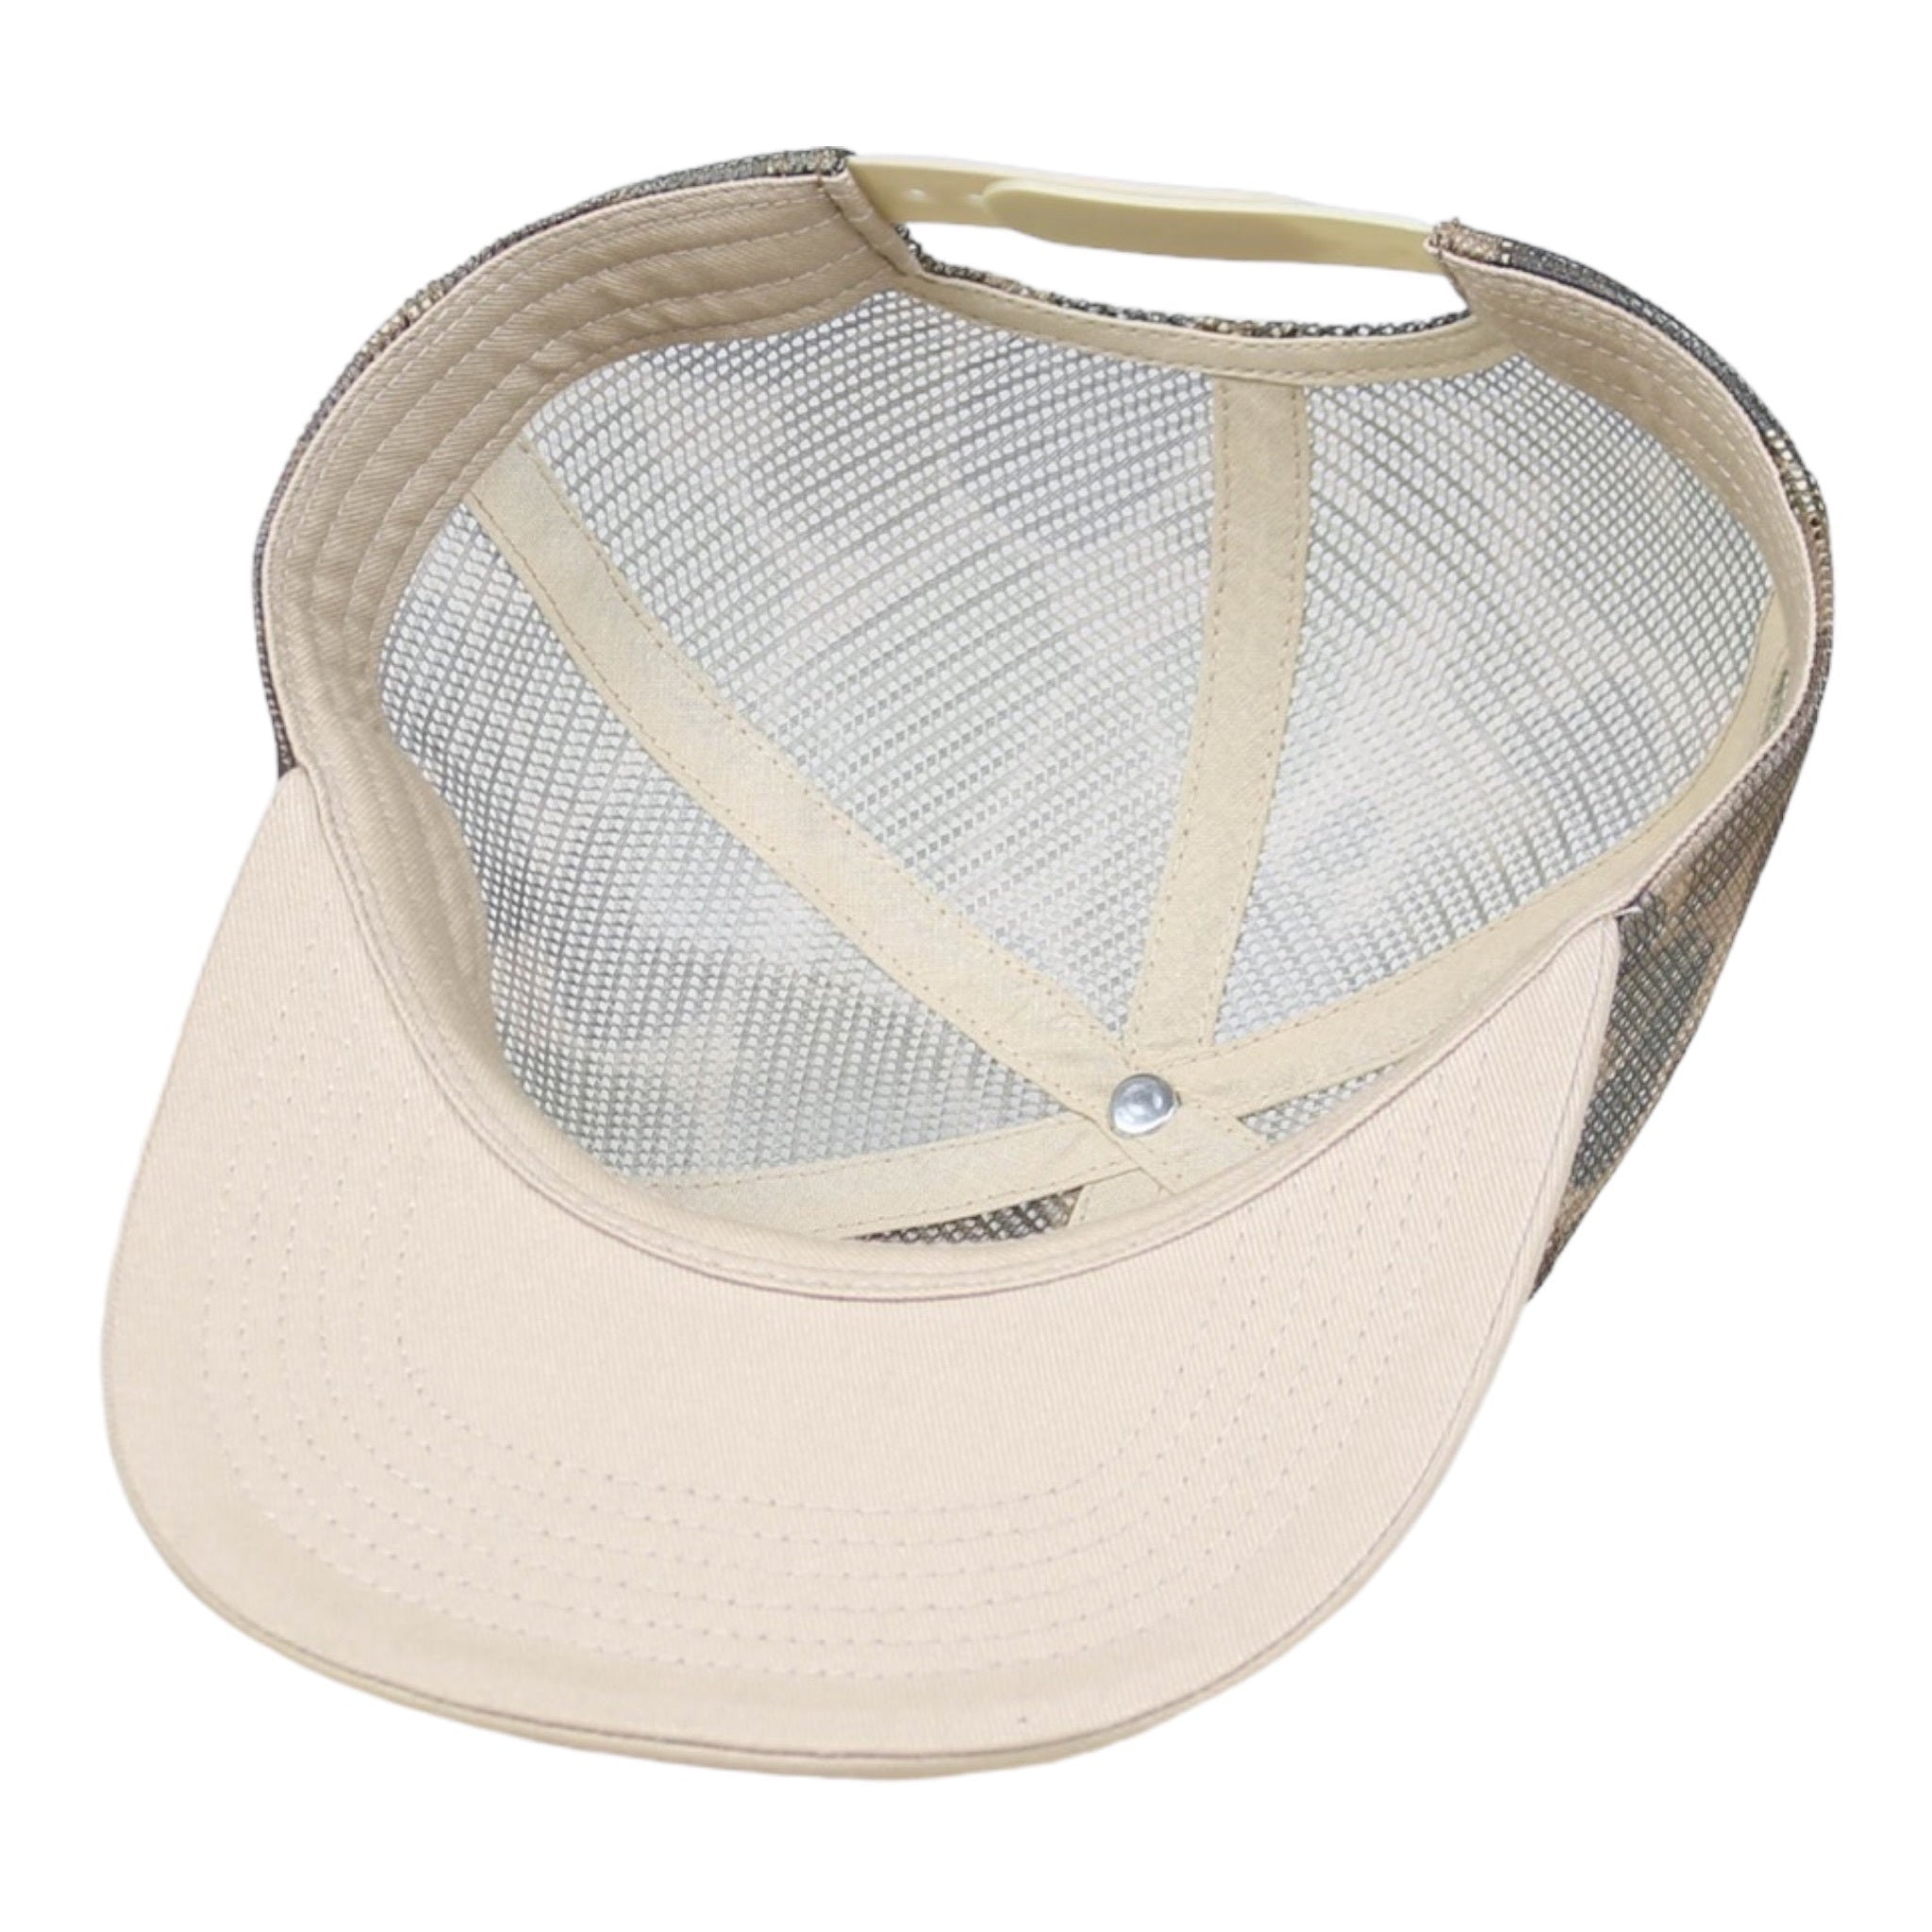 a Fowl Follower Mesh Camo Hat with a white visor on top of it.